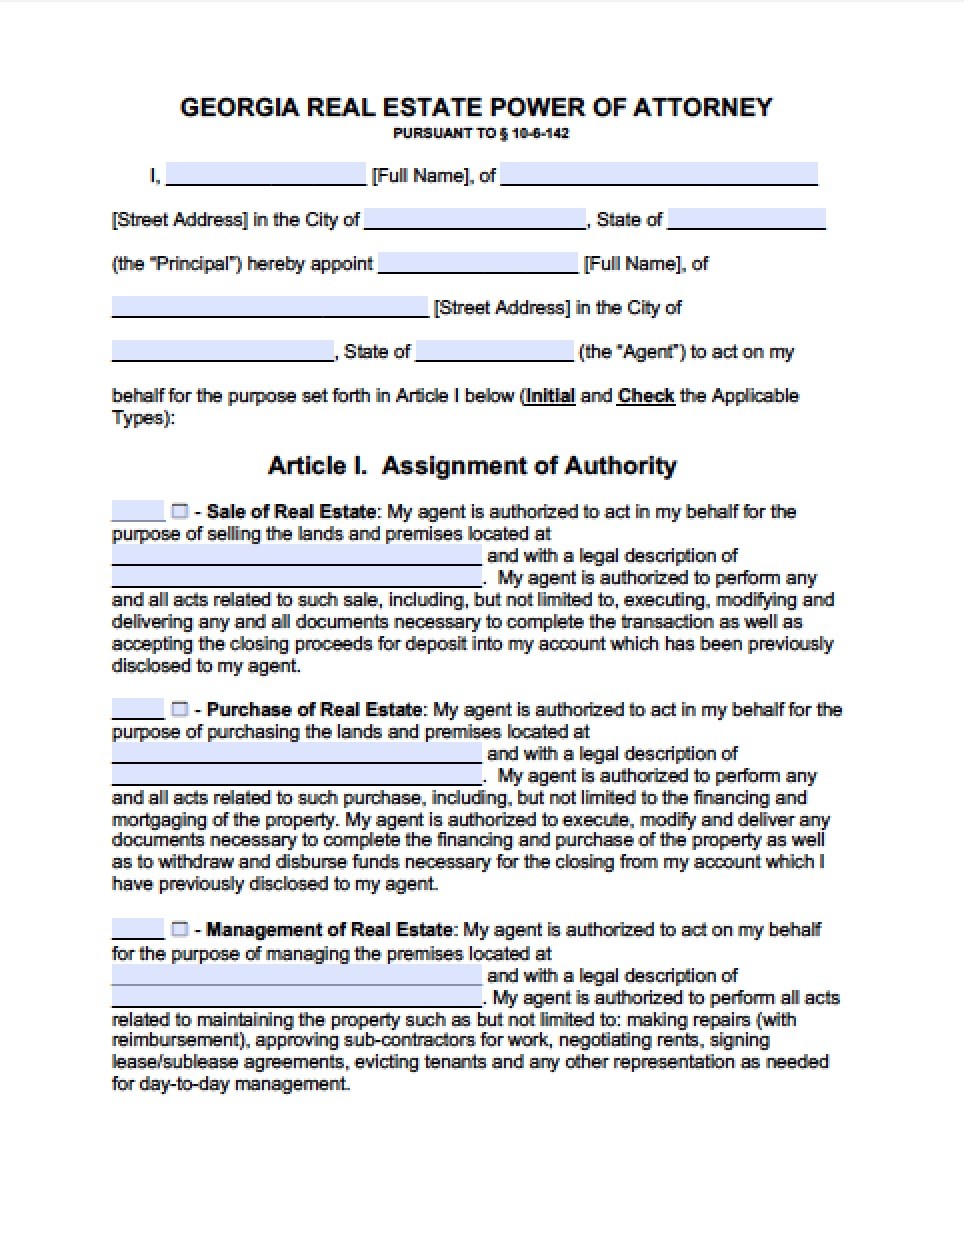 Georgia Real Estate ONLY Power Of Attorney Form Document